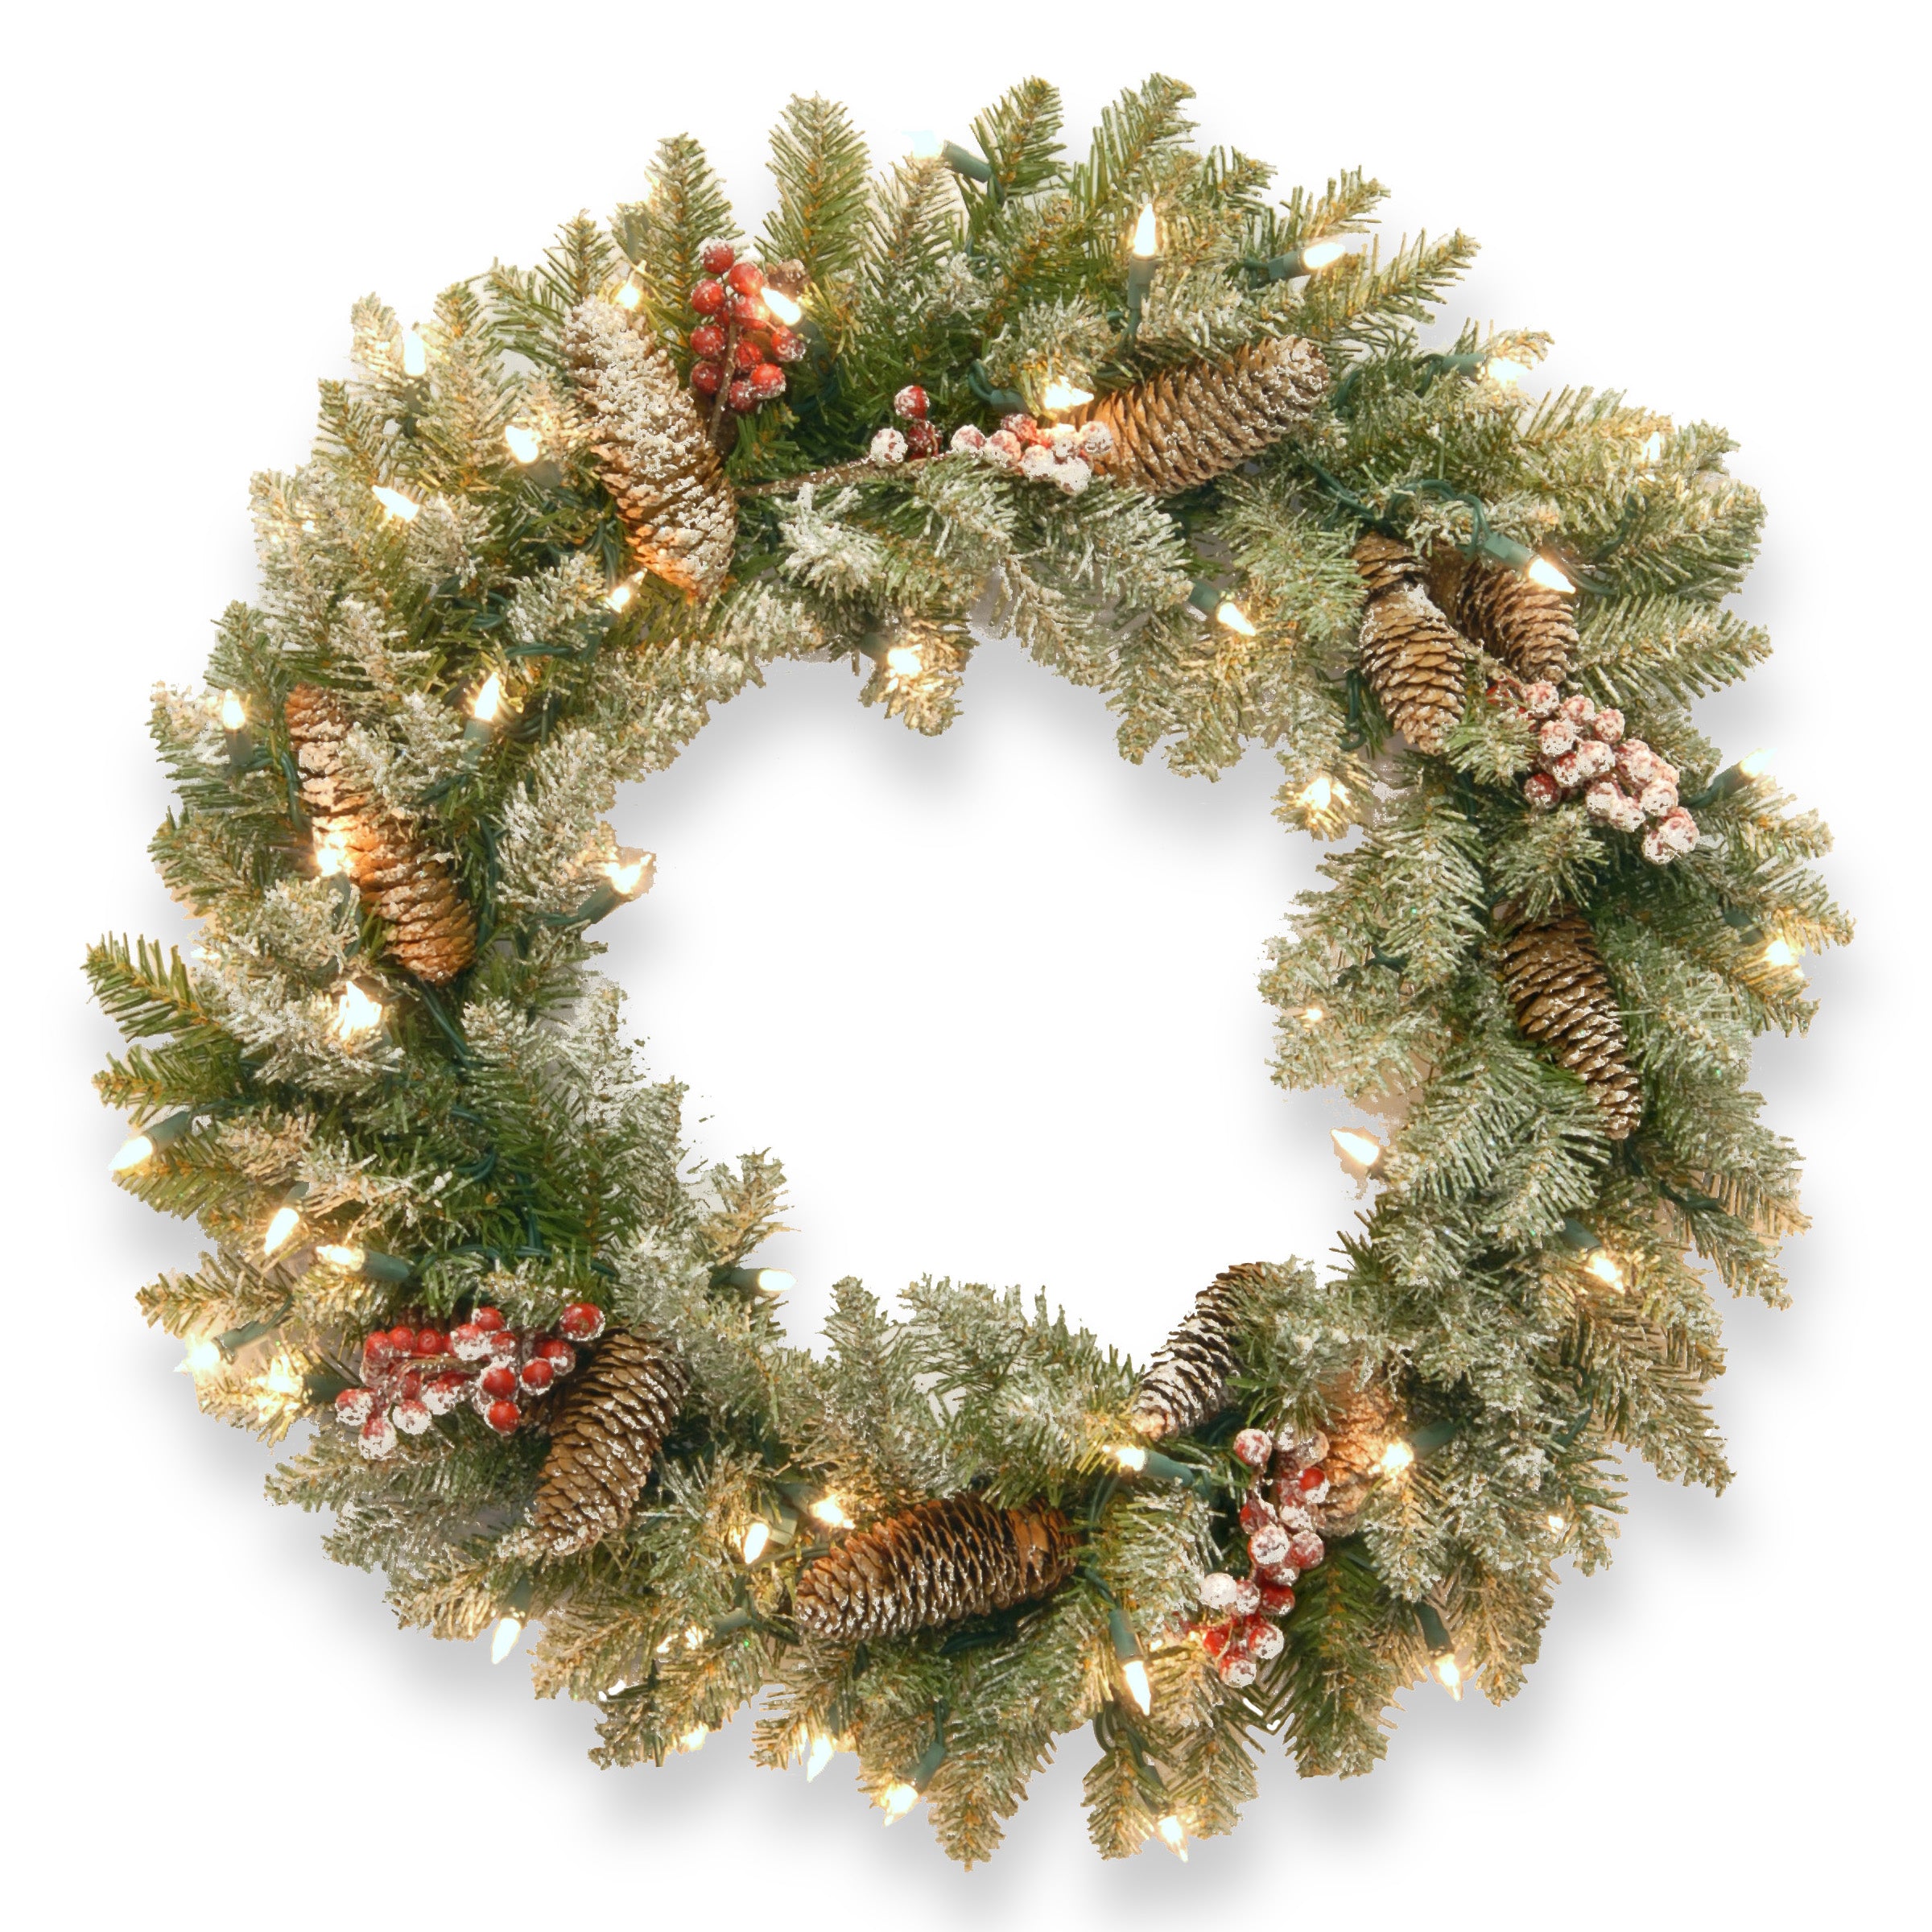 National Tree Duf-300-24w-1 24" Dunhill Fir Wreath With Snow, Red Berries, Cones And 50 Snow Lights